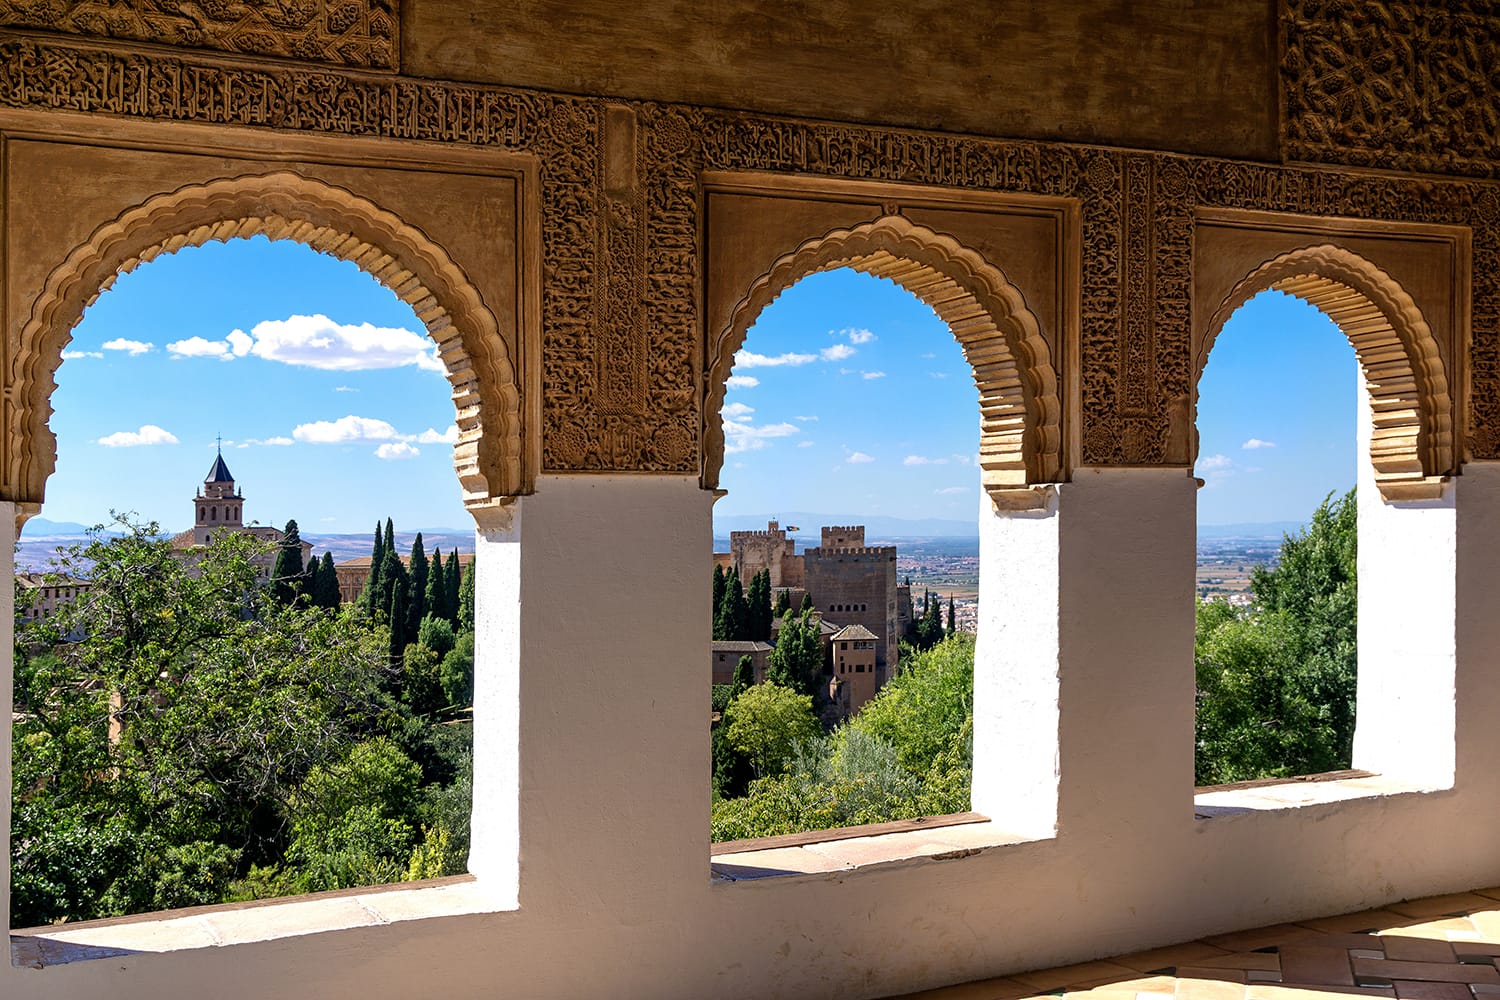 Stone arches in the world-famous Alhambra in Granada with beautiful views of the fortress and Granada, Spain